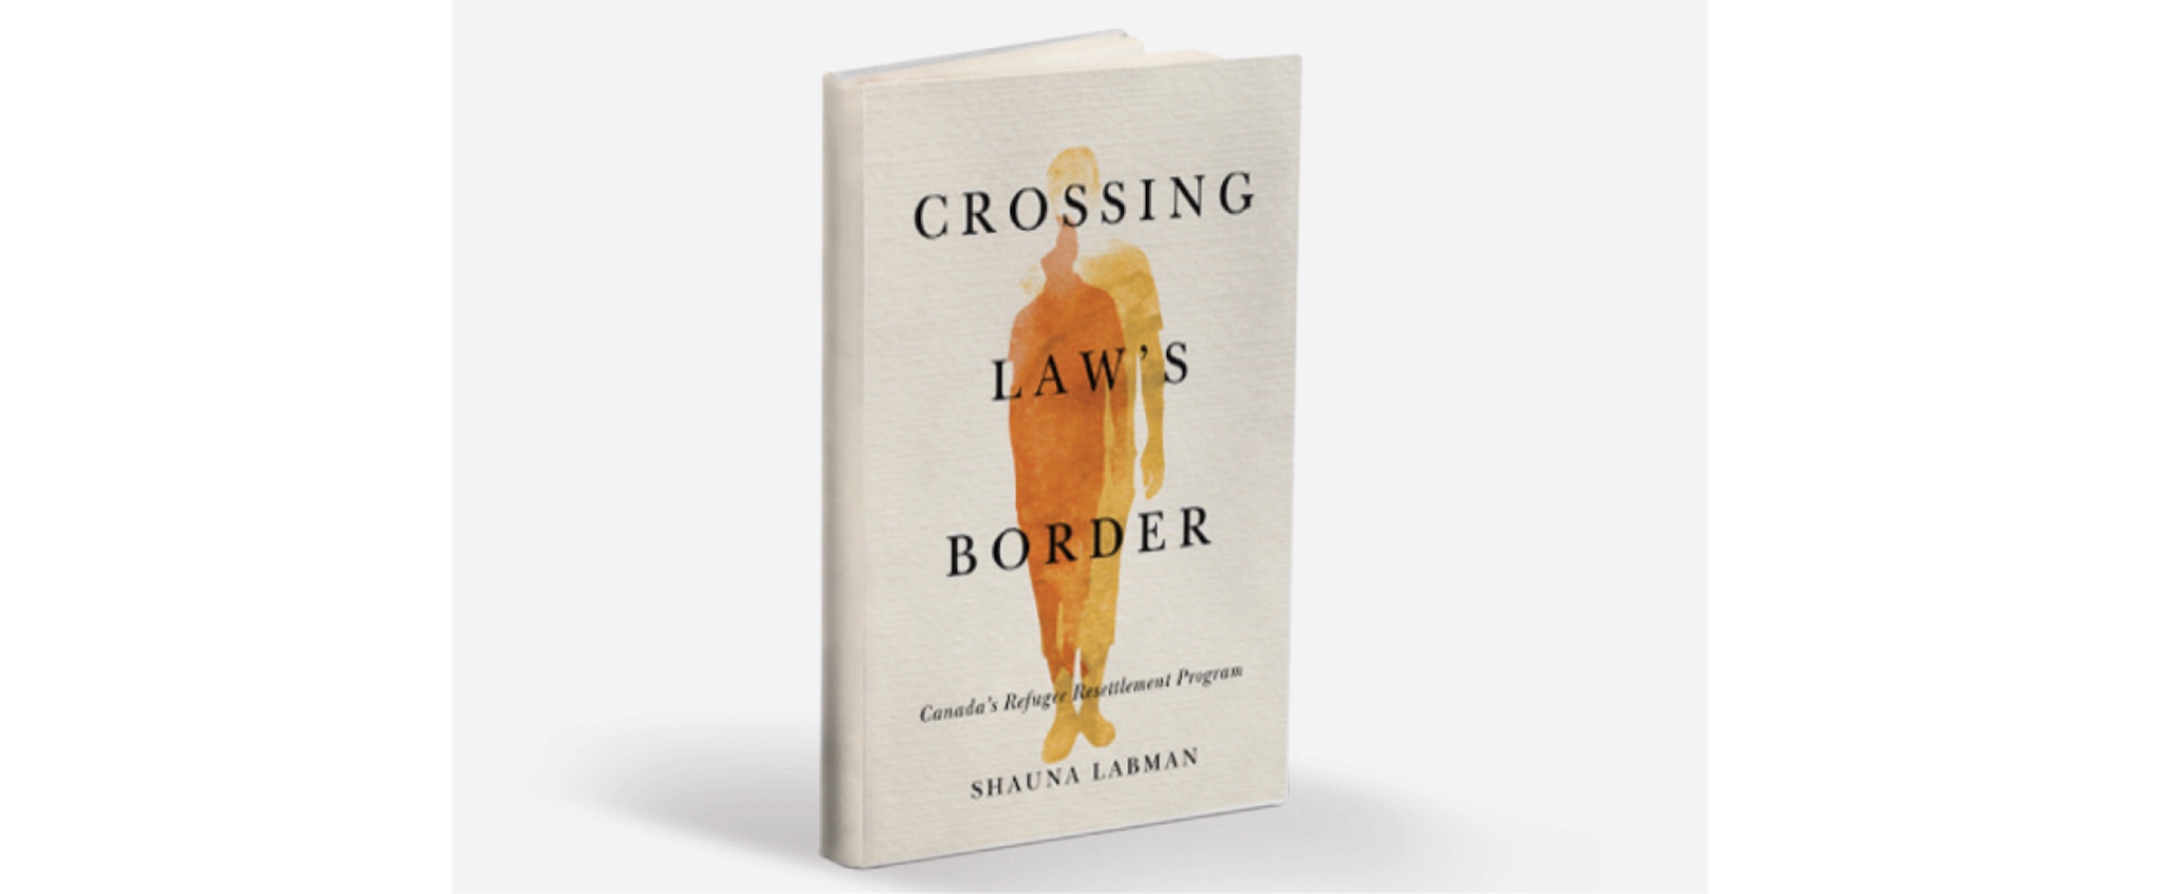 "Crossing Law's Border" book cover